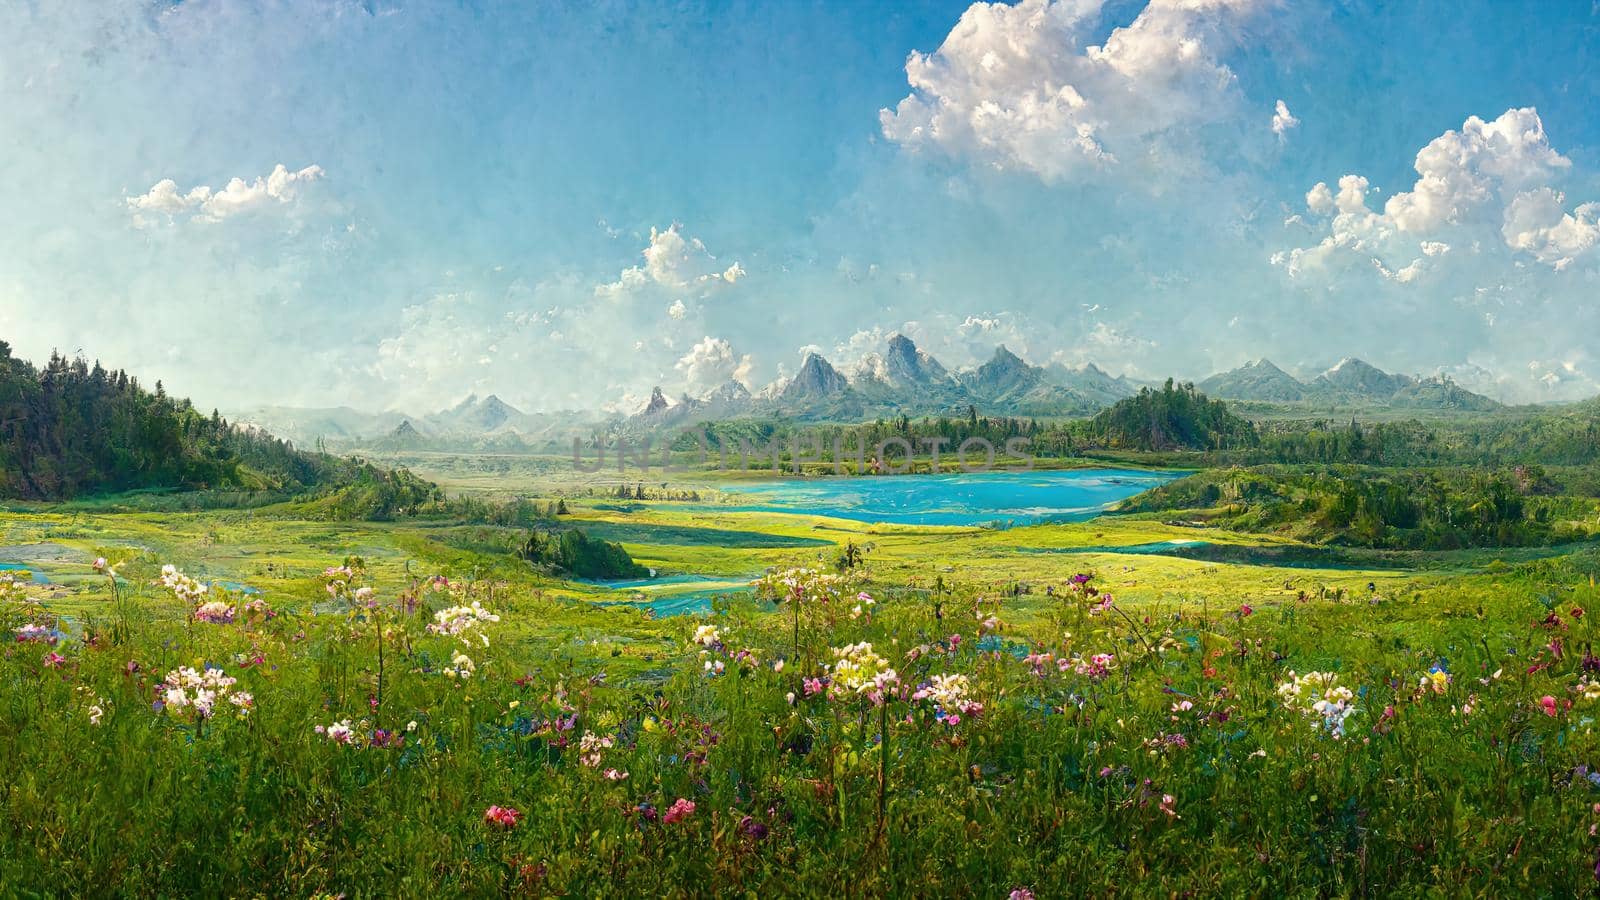 blue mountain lake surrounded by flowers on a sunny summer day.